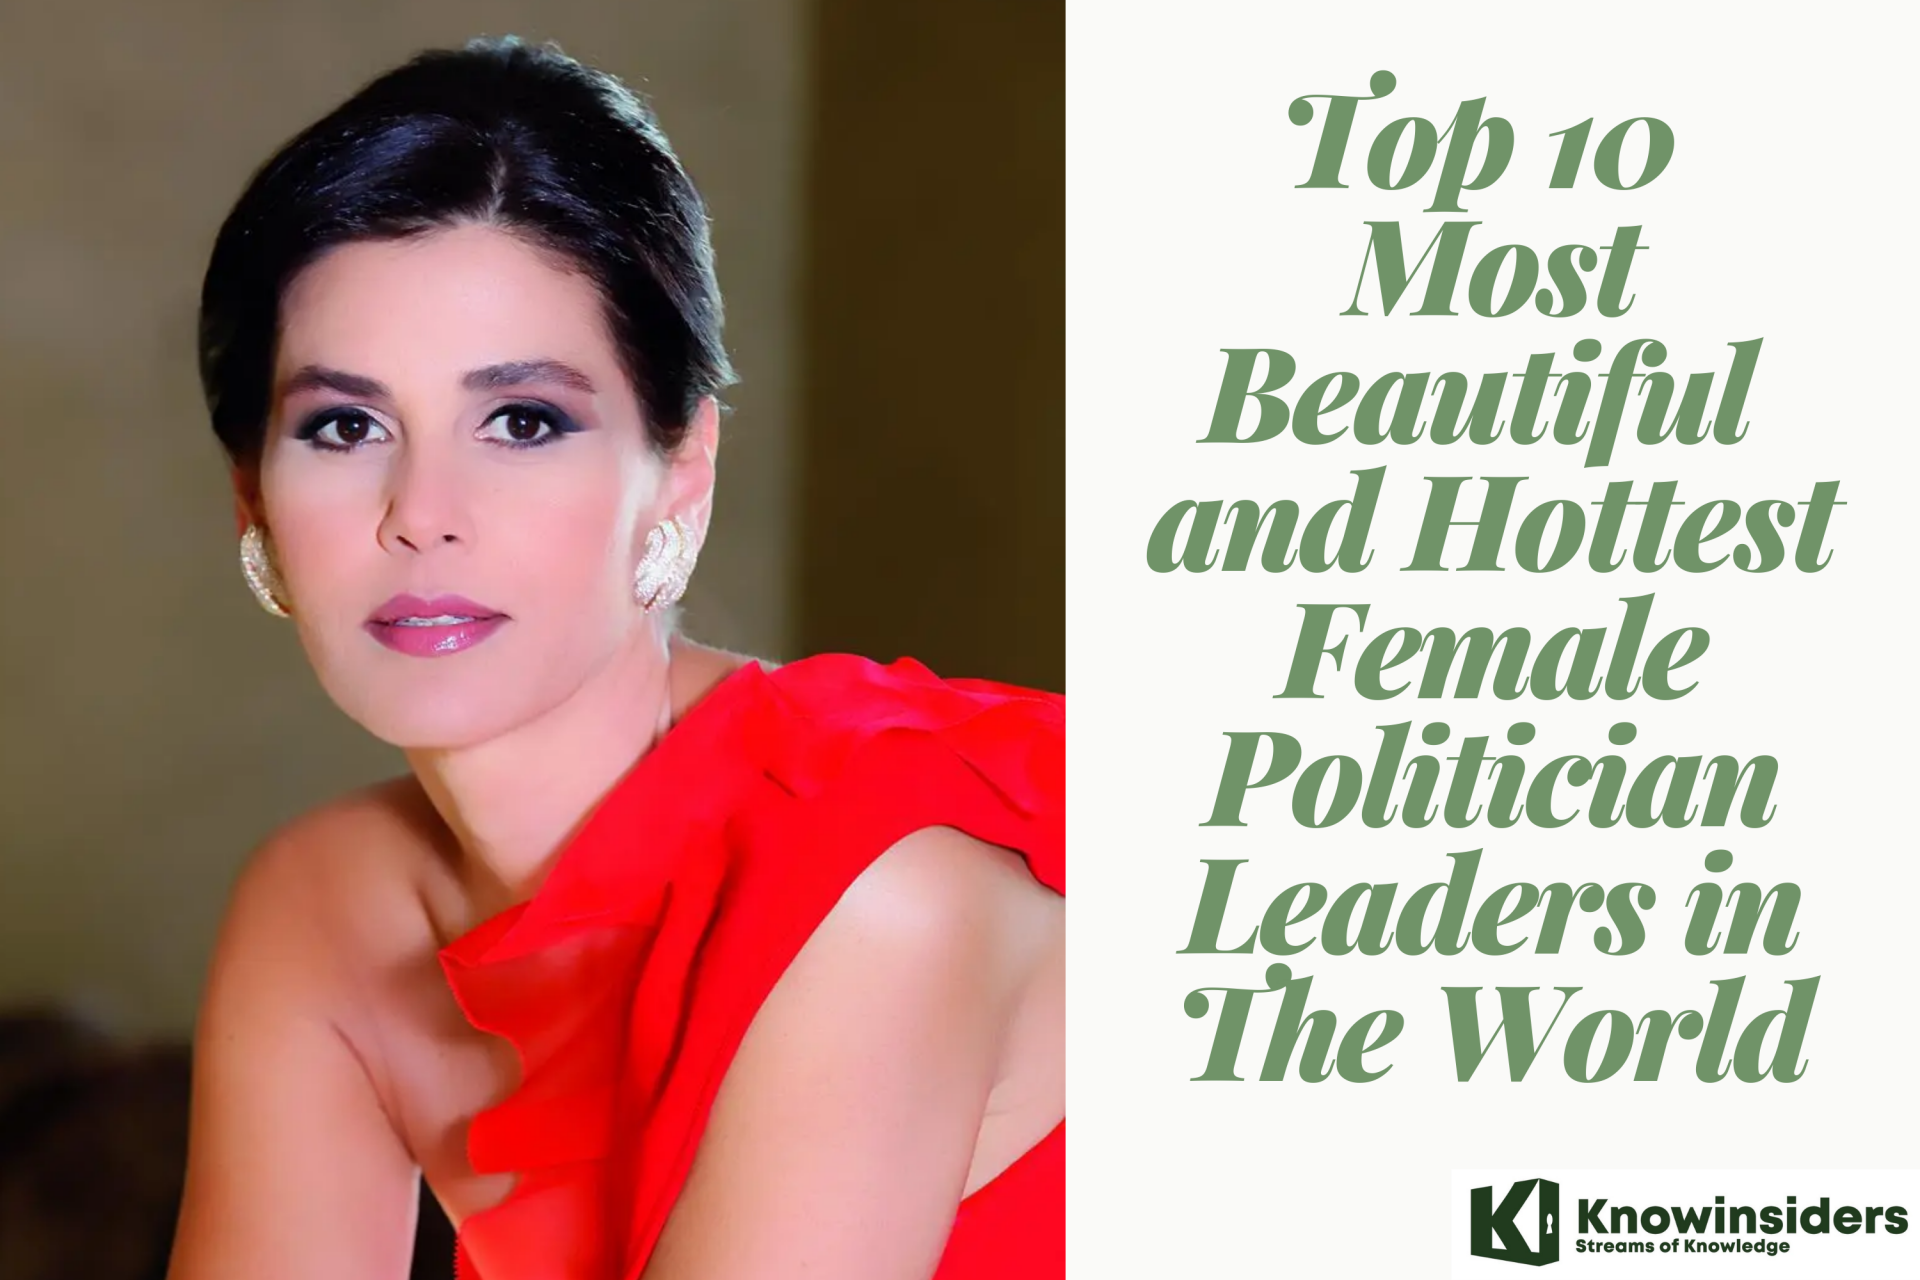 Top 10 Most Beautiful and Hottest Female Politician Leaders in The World